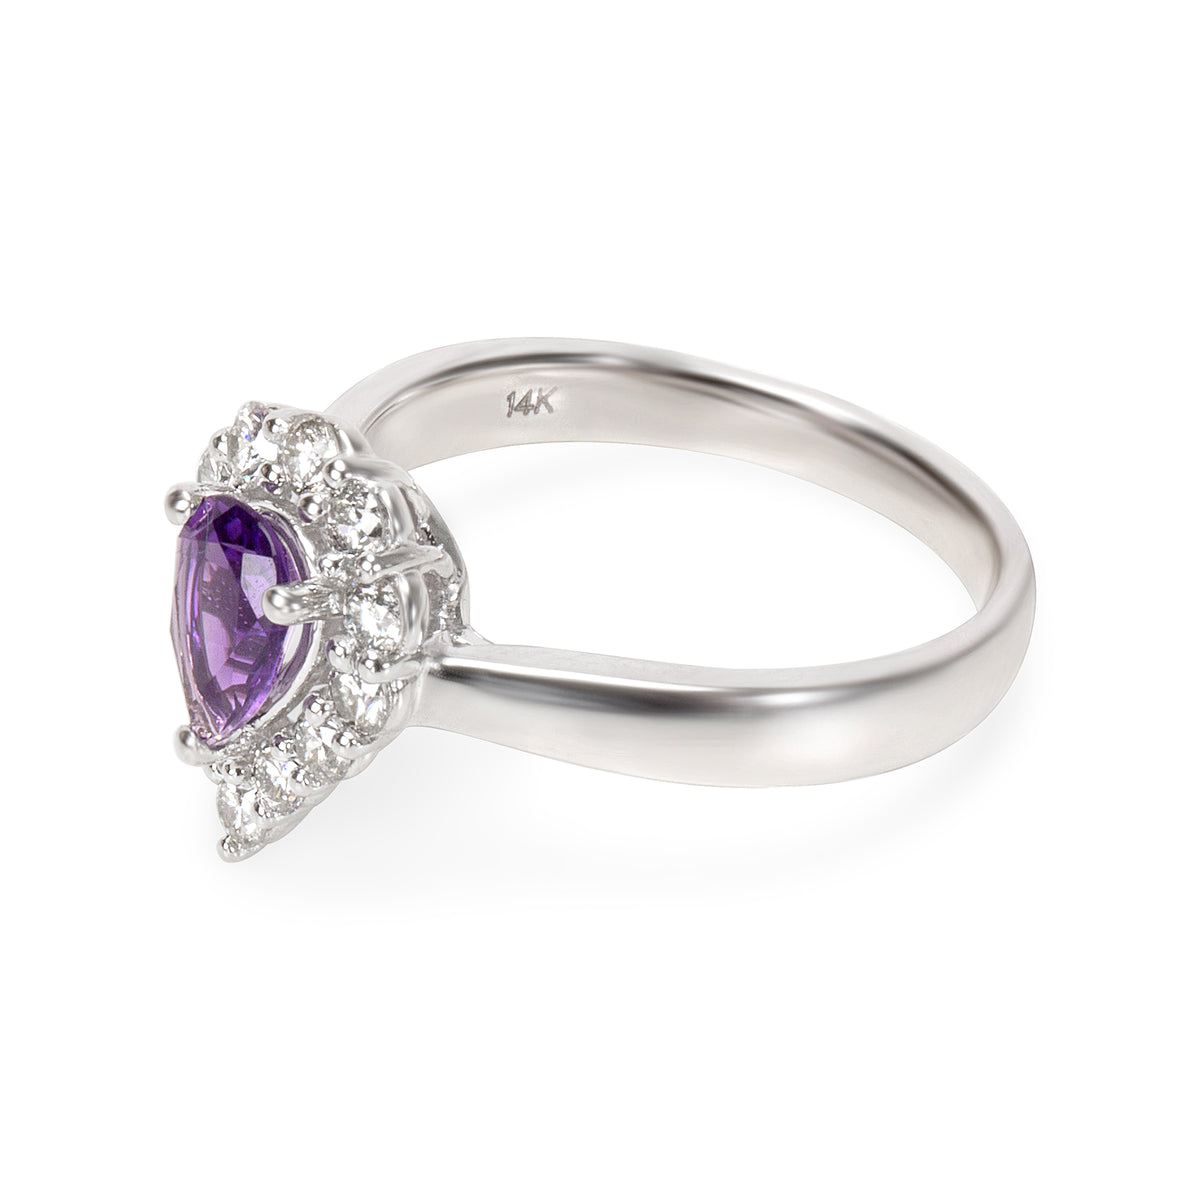 BRAND NEW Diamond Halo Pear Shape Amethyst Ring in 14k White Gold (0.60 CTW)